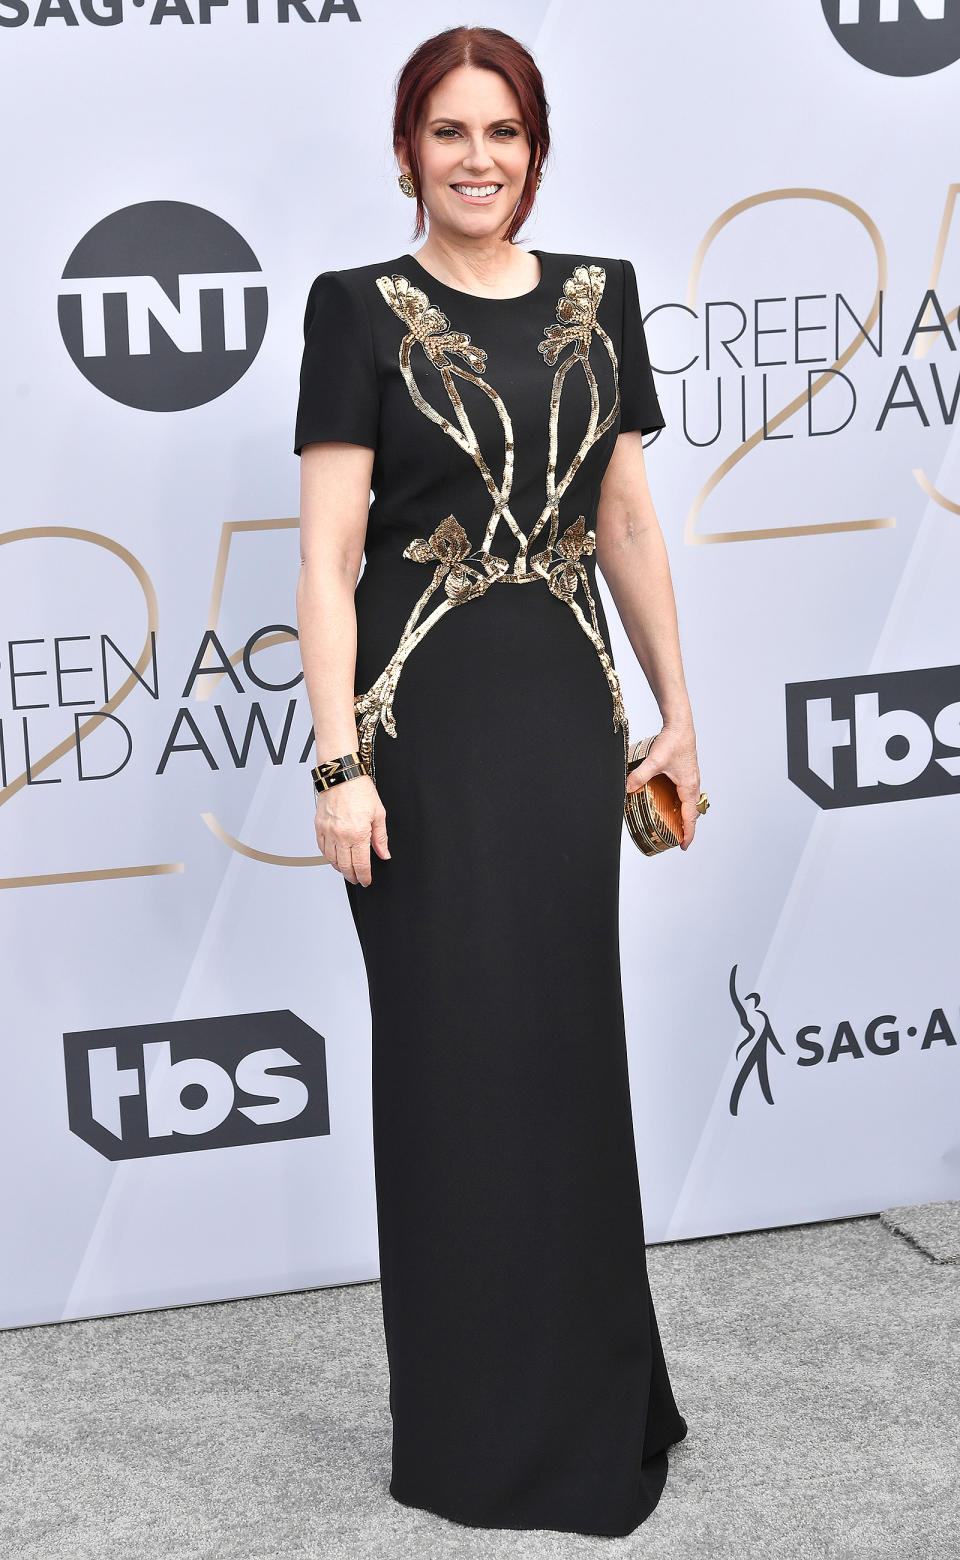 SAG Awards 2019: Megan Mullally Bought Her Own Dress When Designers Refused to Dress Her